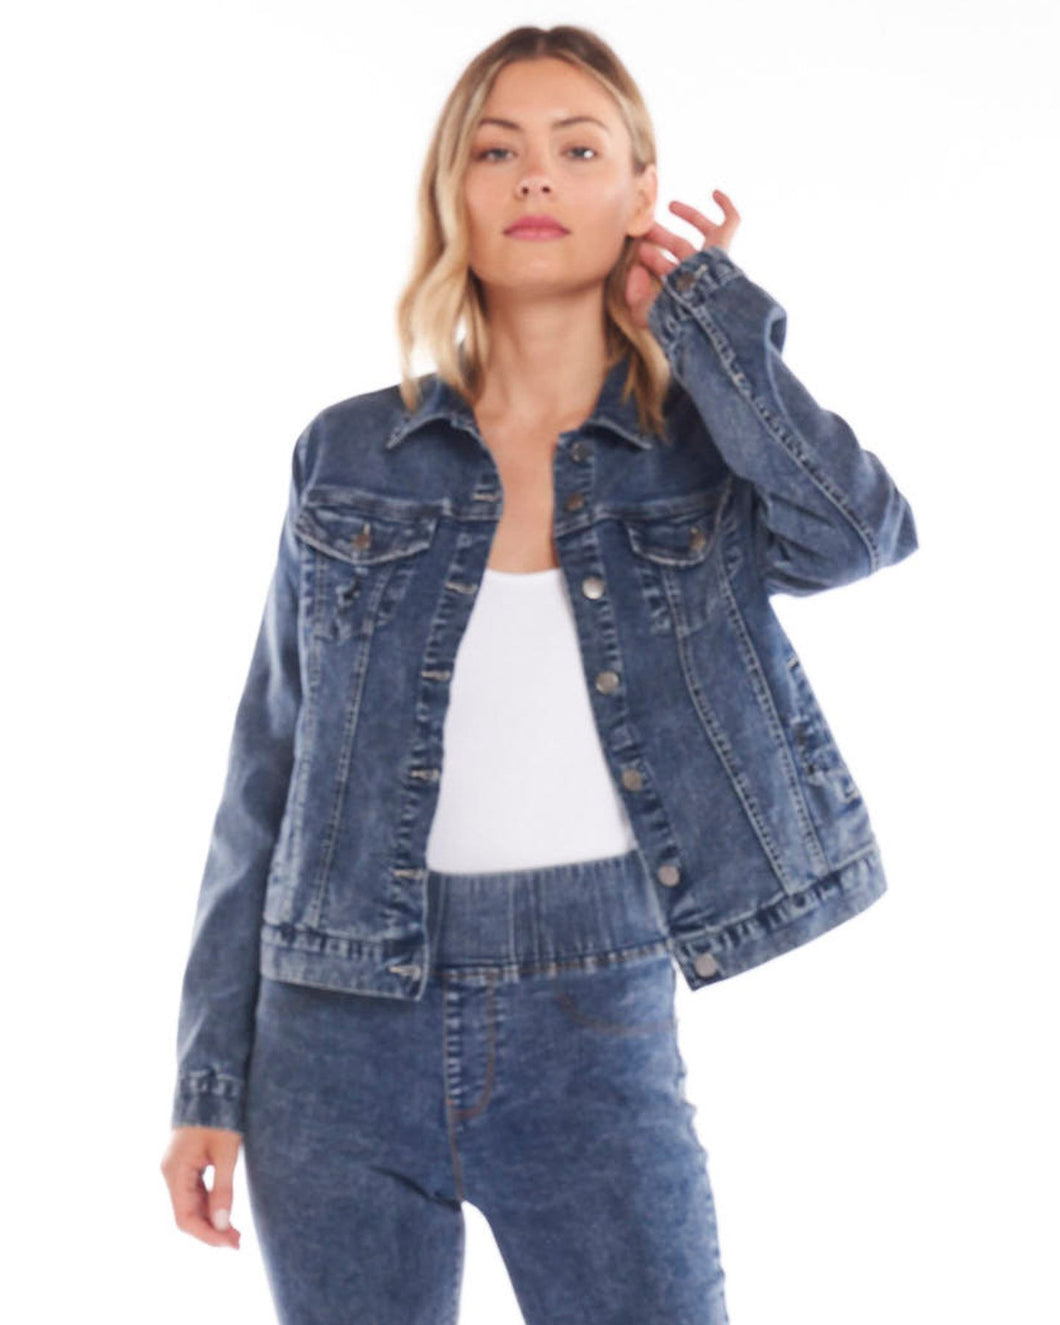 Sass Clothing, Betty Basics, denim jacket, dusty blue, wardrobe staple, denim double denim, winter 2022, autumn 2022, cool nights, throw on, smart casual, dress it up or down, must have, top pick, comfort, support small business, online